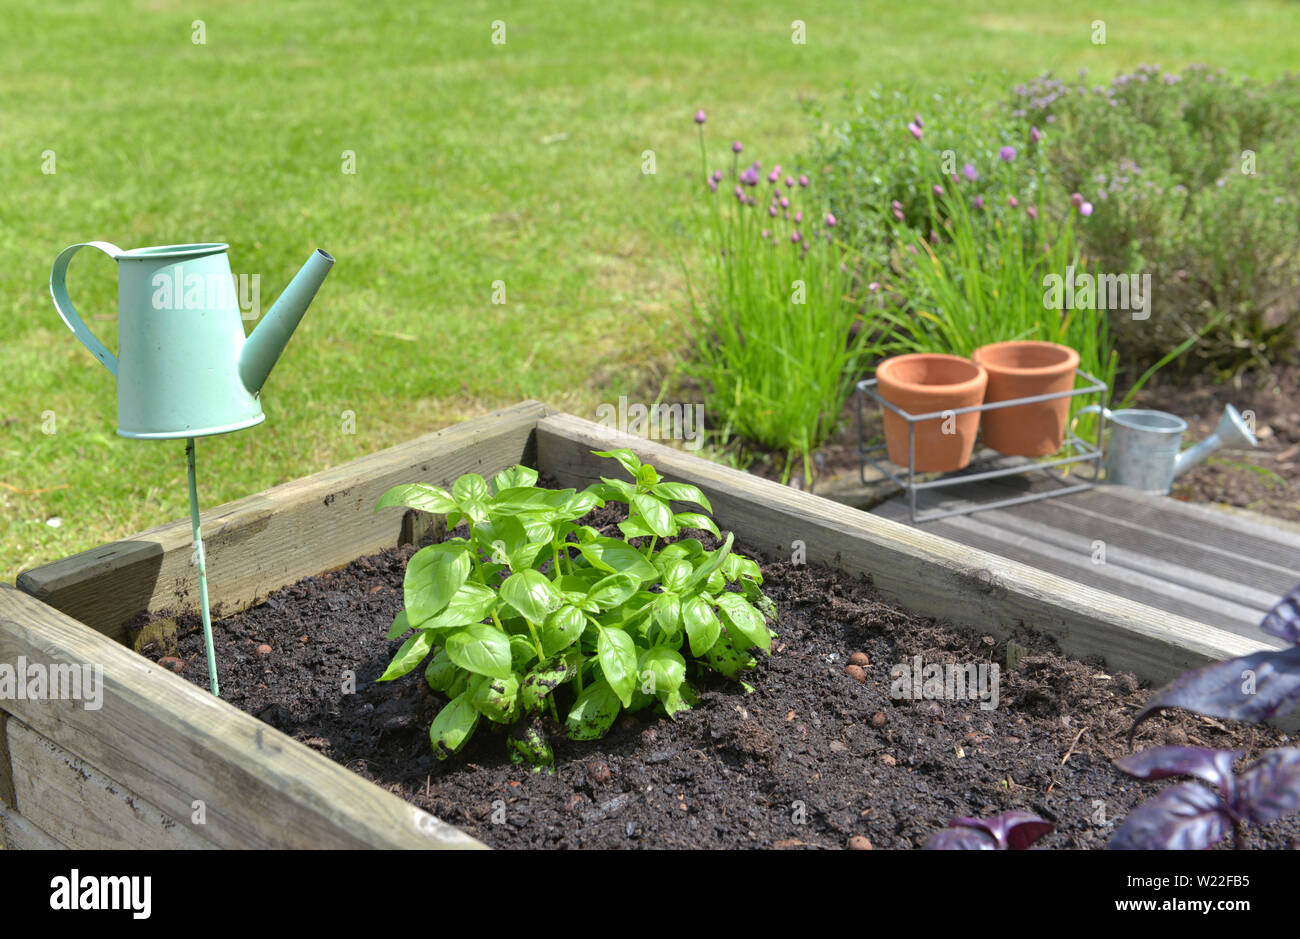 basil growing in a wooden tub next to other aromatic plants Stock Photo